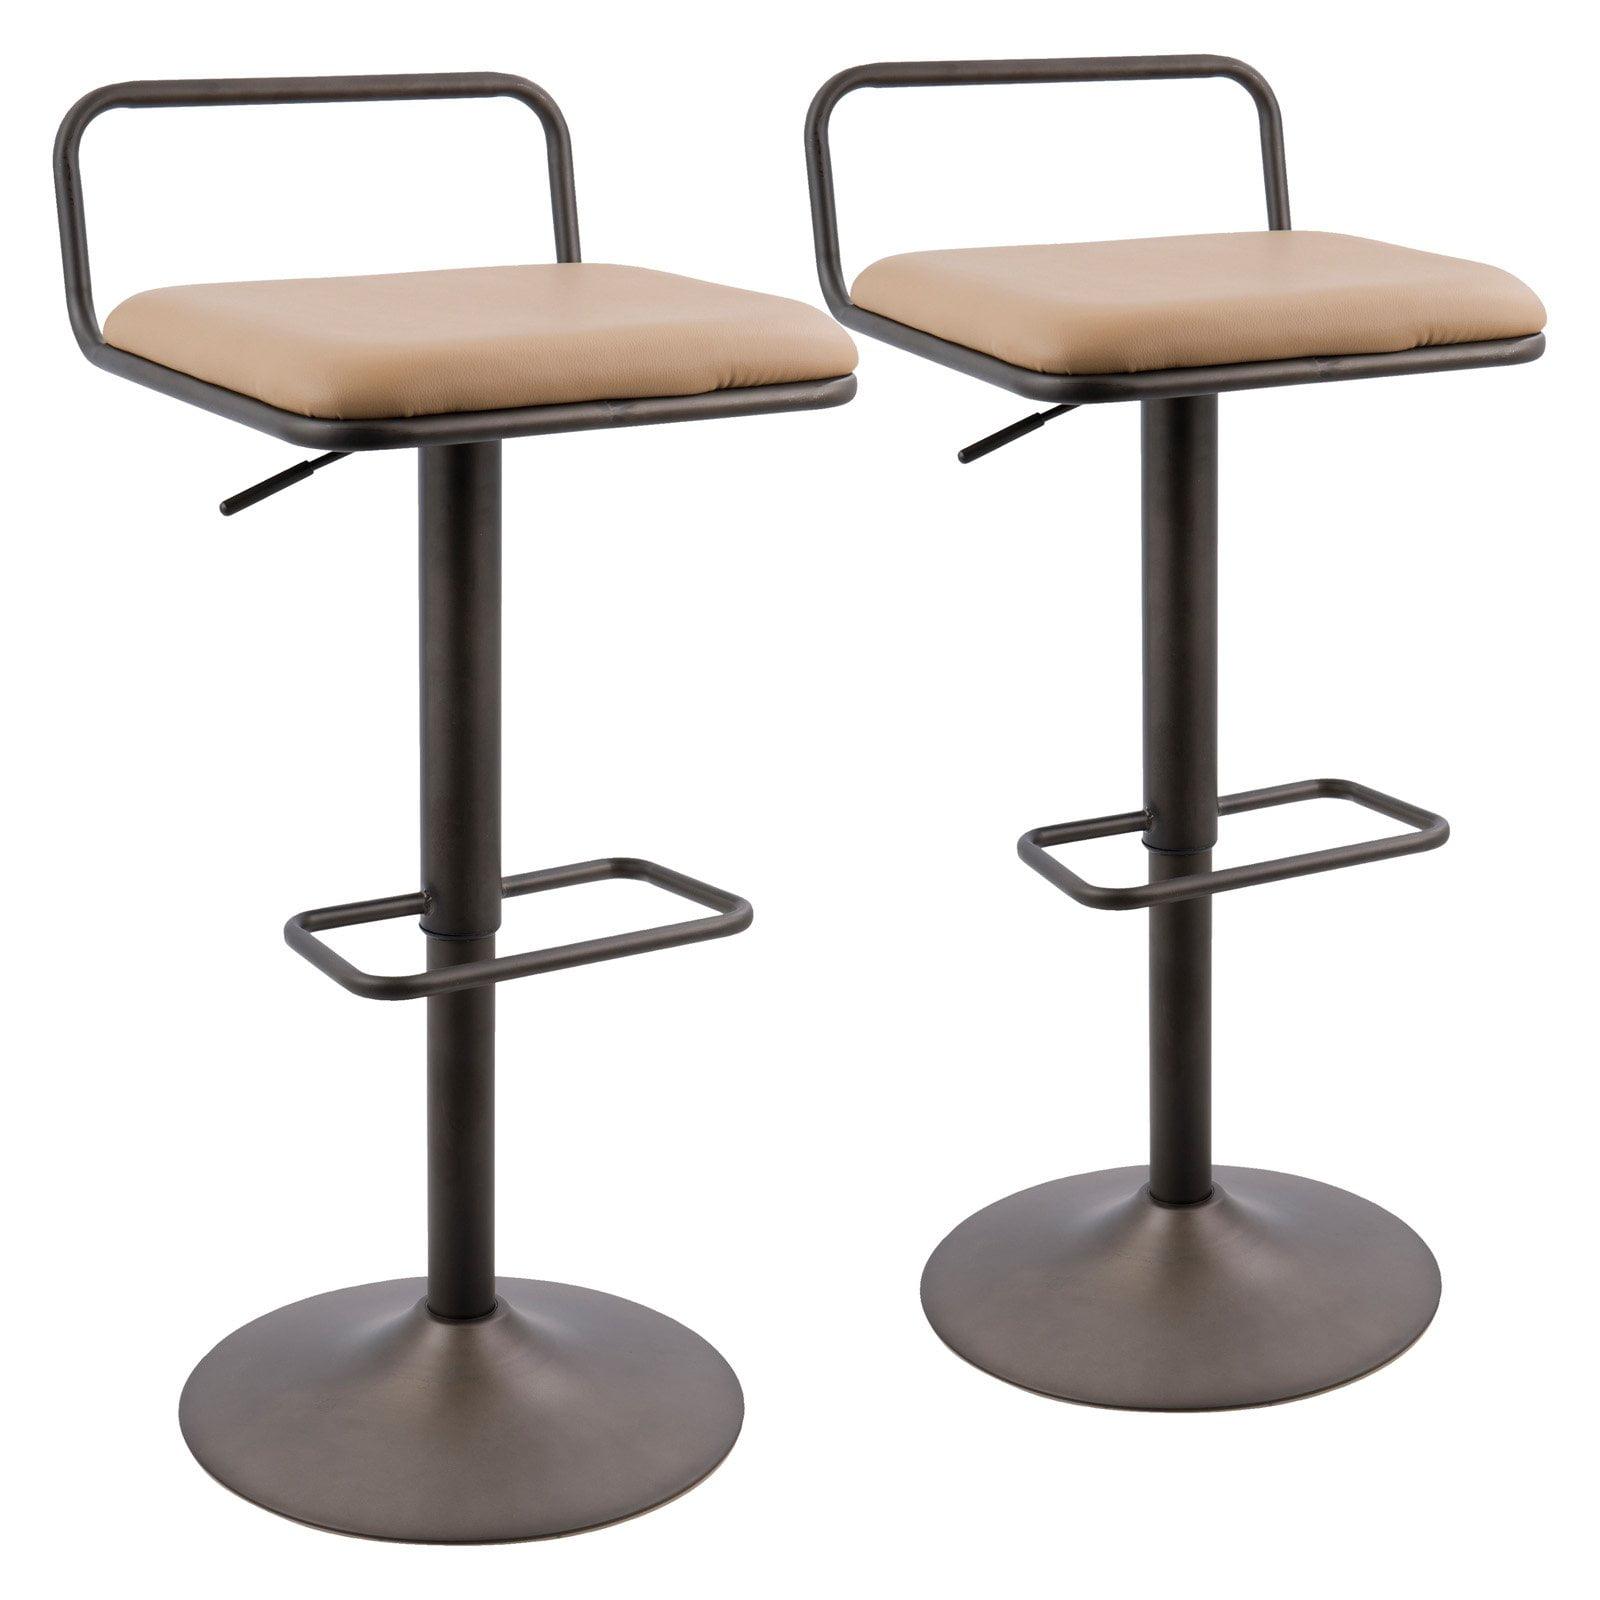 Contemporary Swivel Adjustable Barstool in Antique Brown Leather